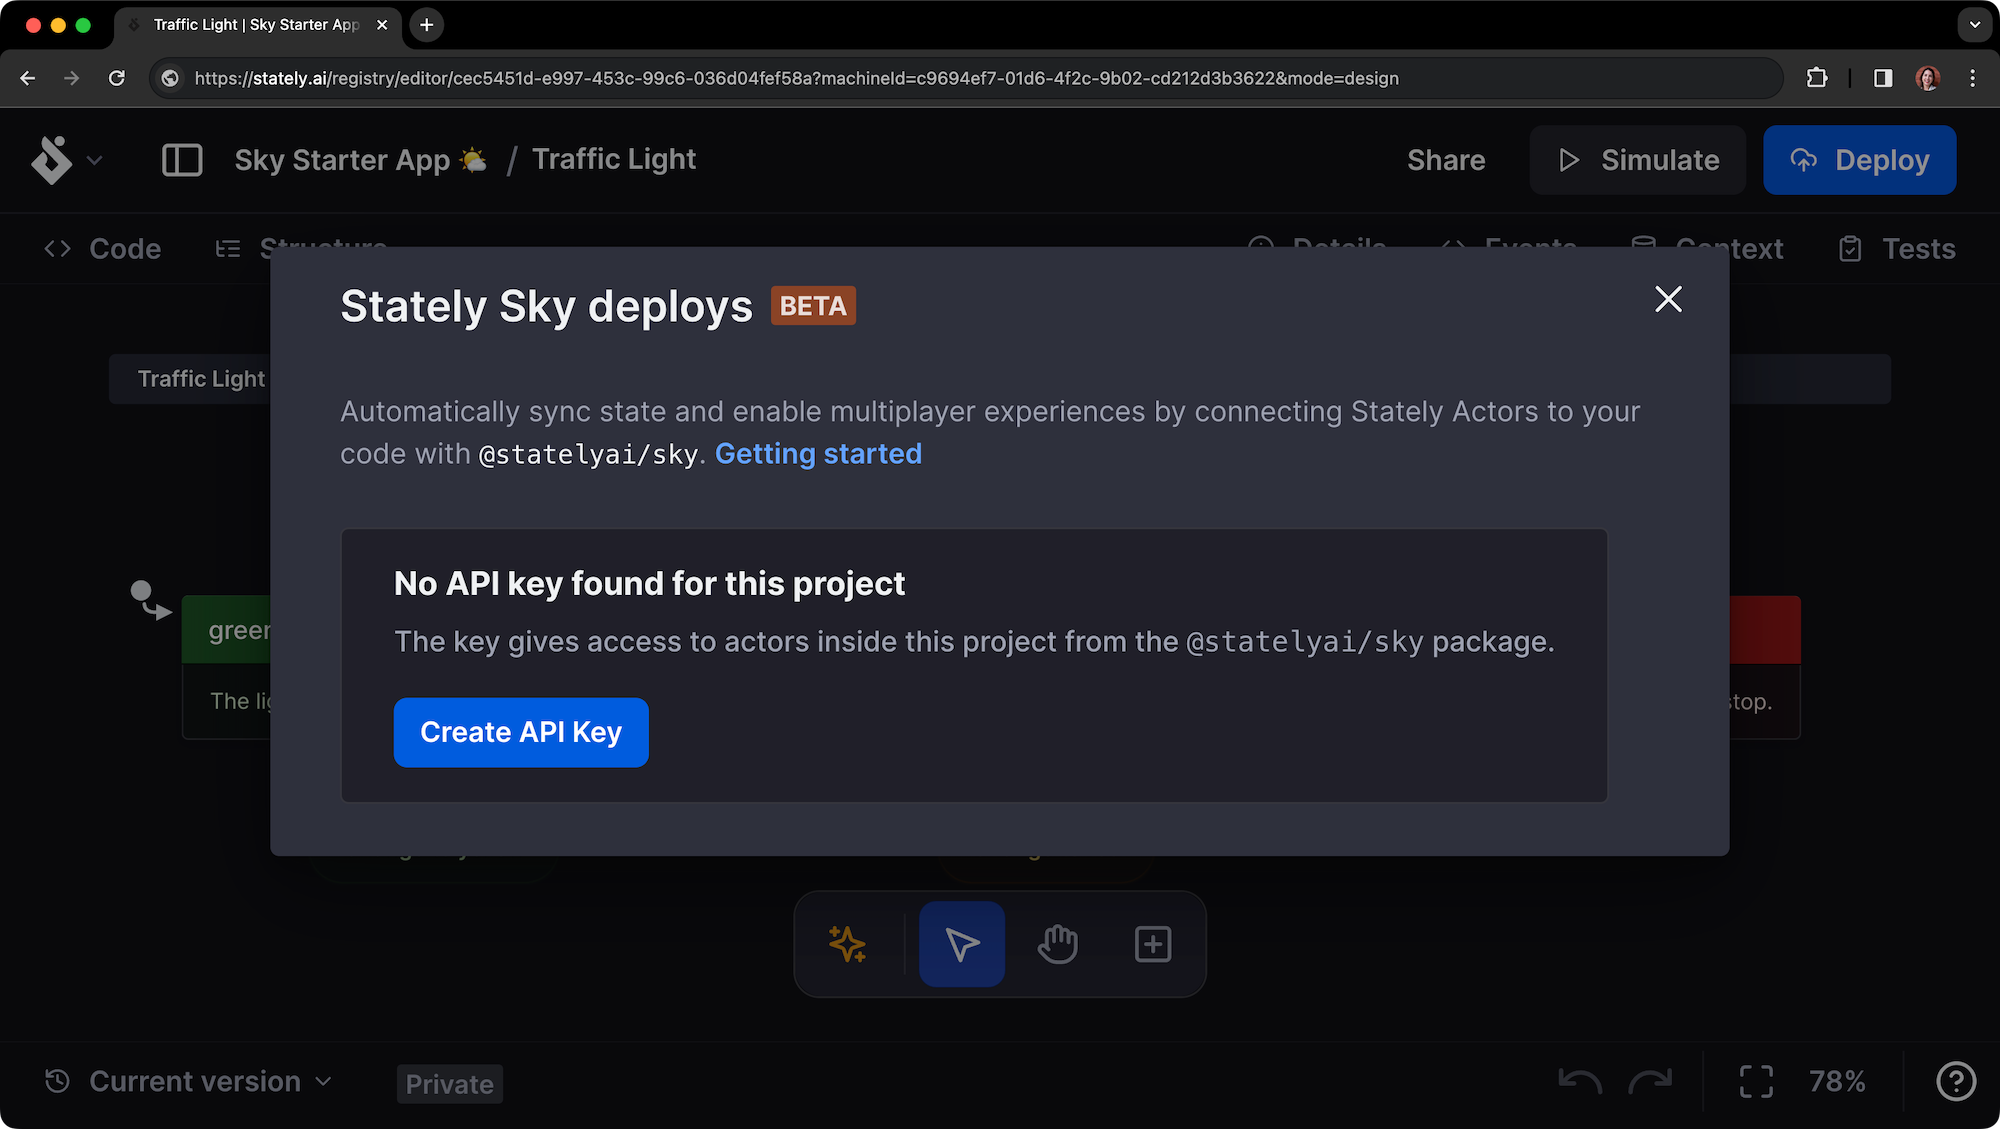 Stately Sky modal showing no API key created yet. There is a button to Create API Key.